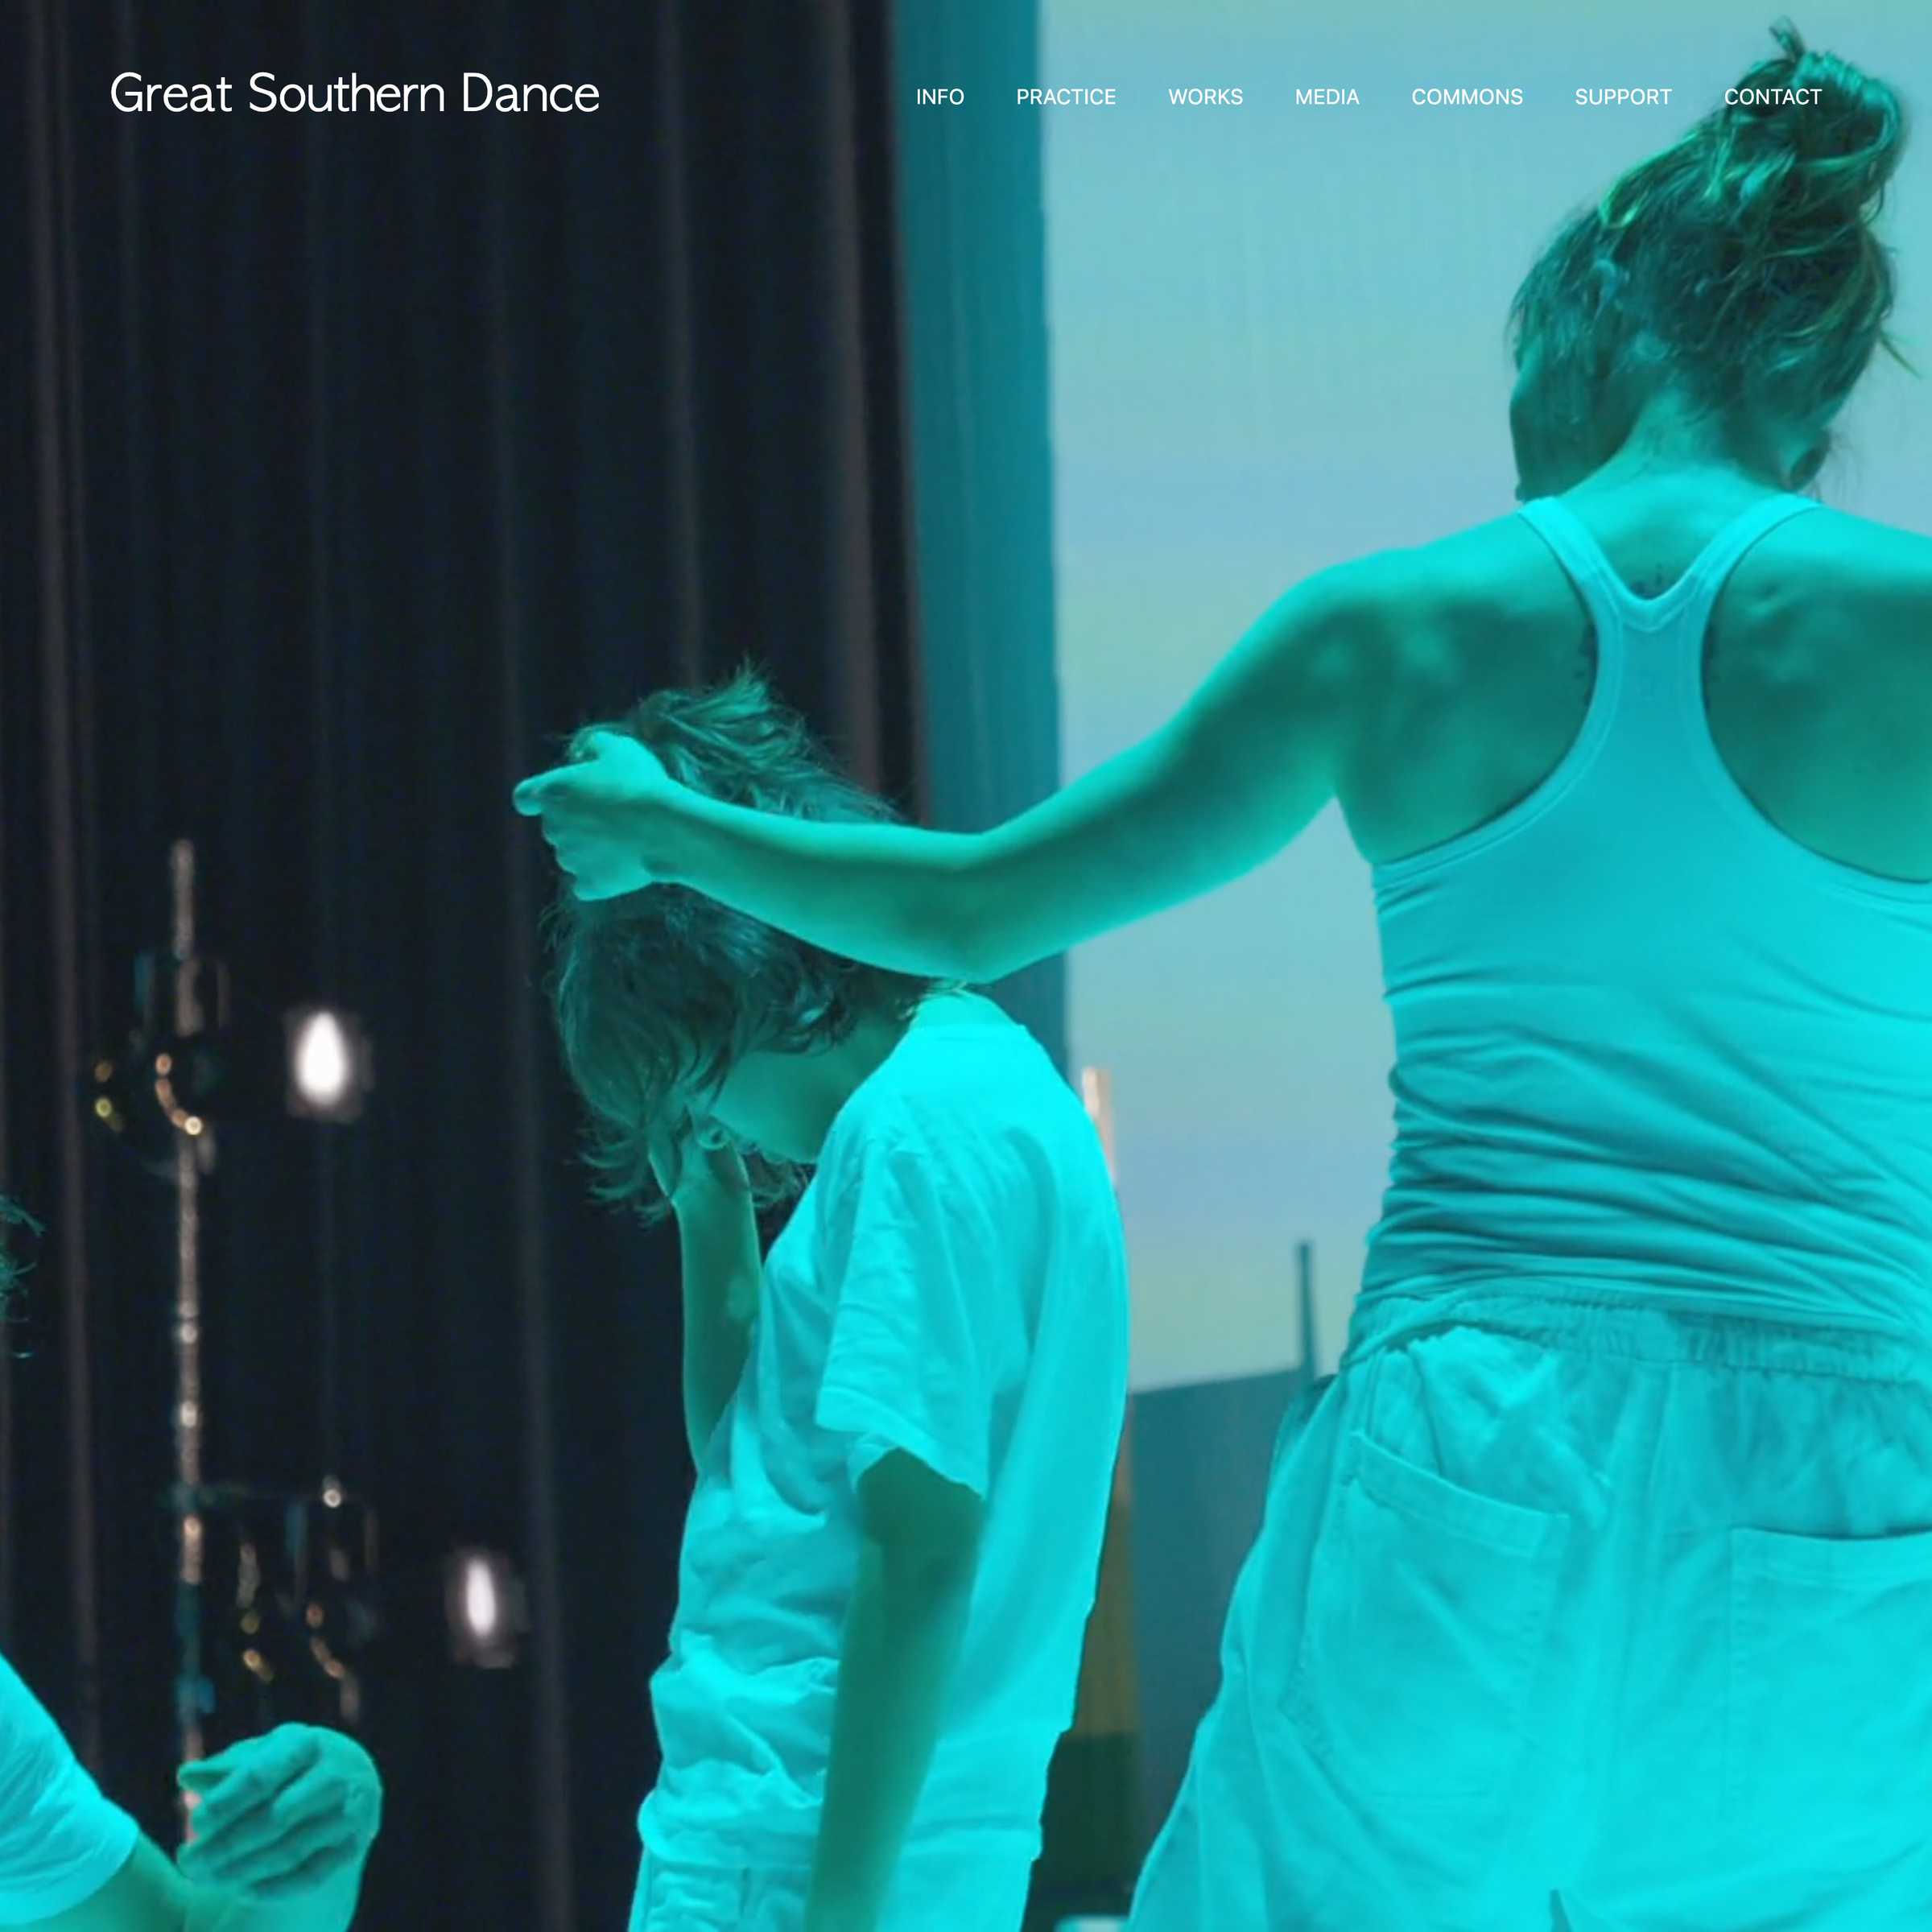 Screenshot of the Great Southern Dance project